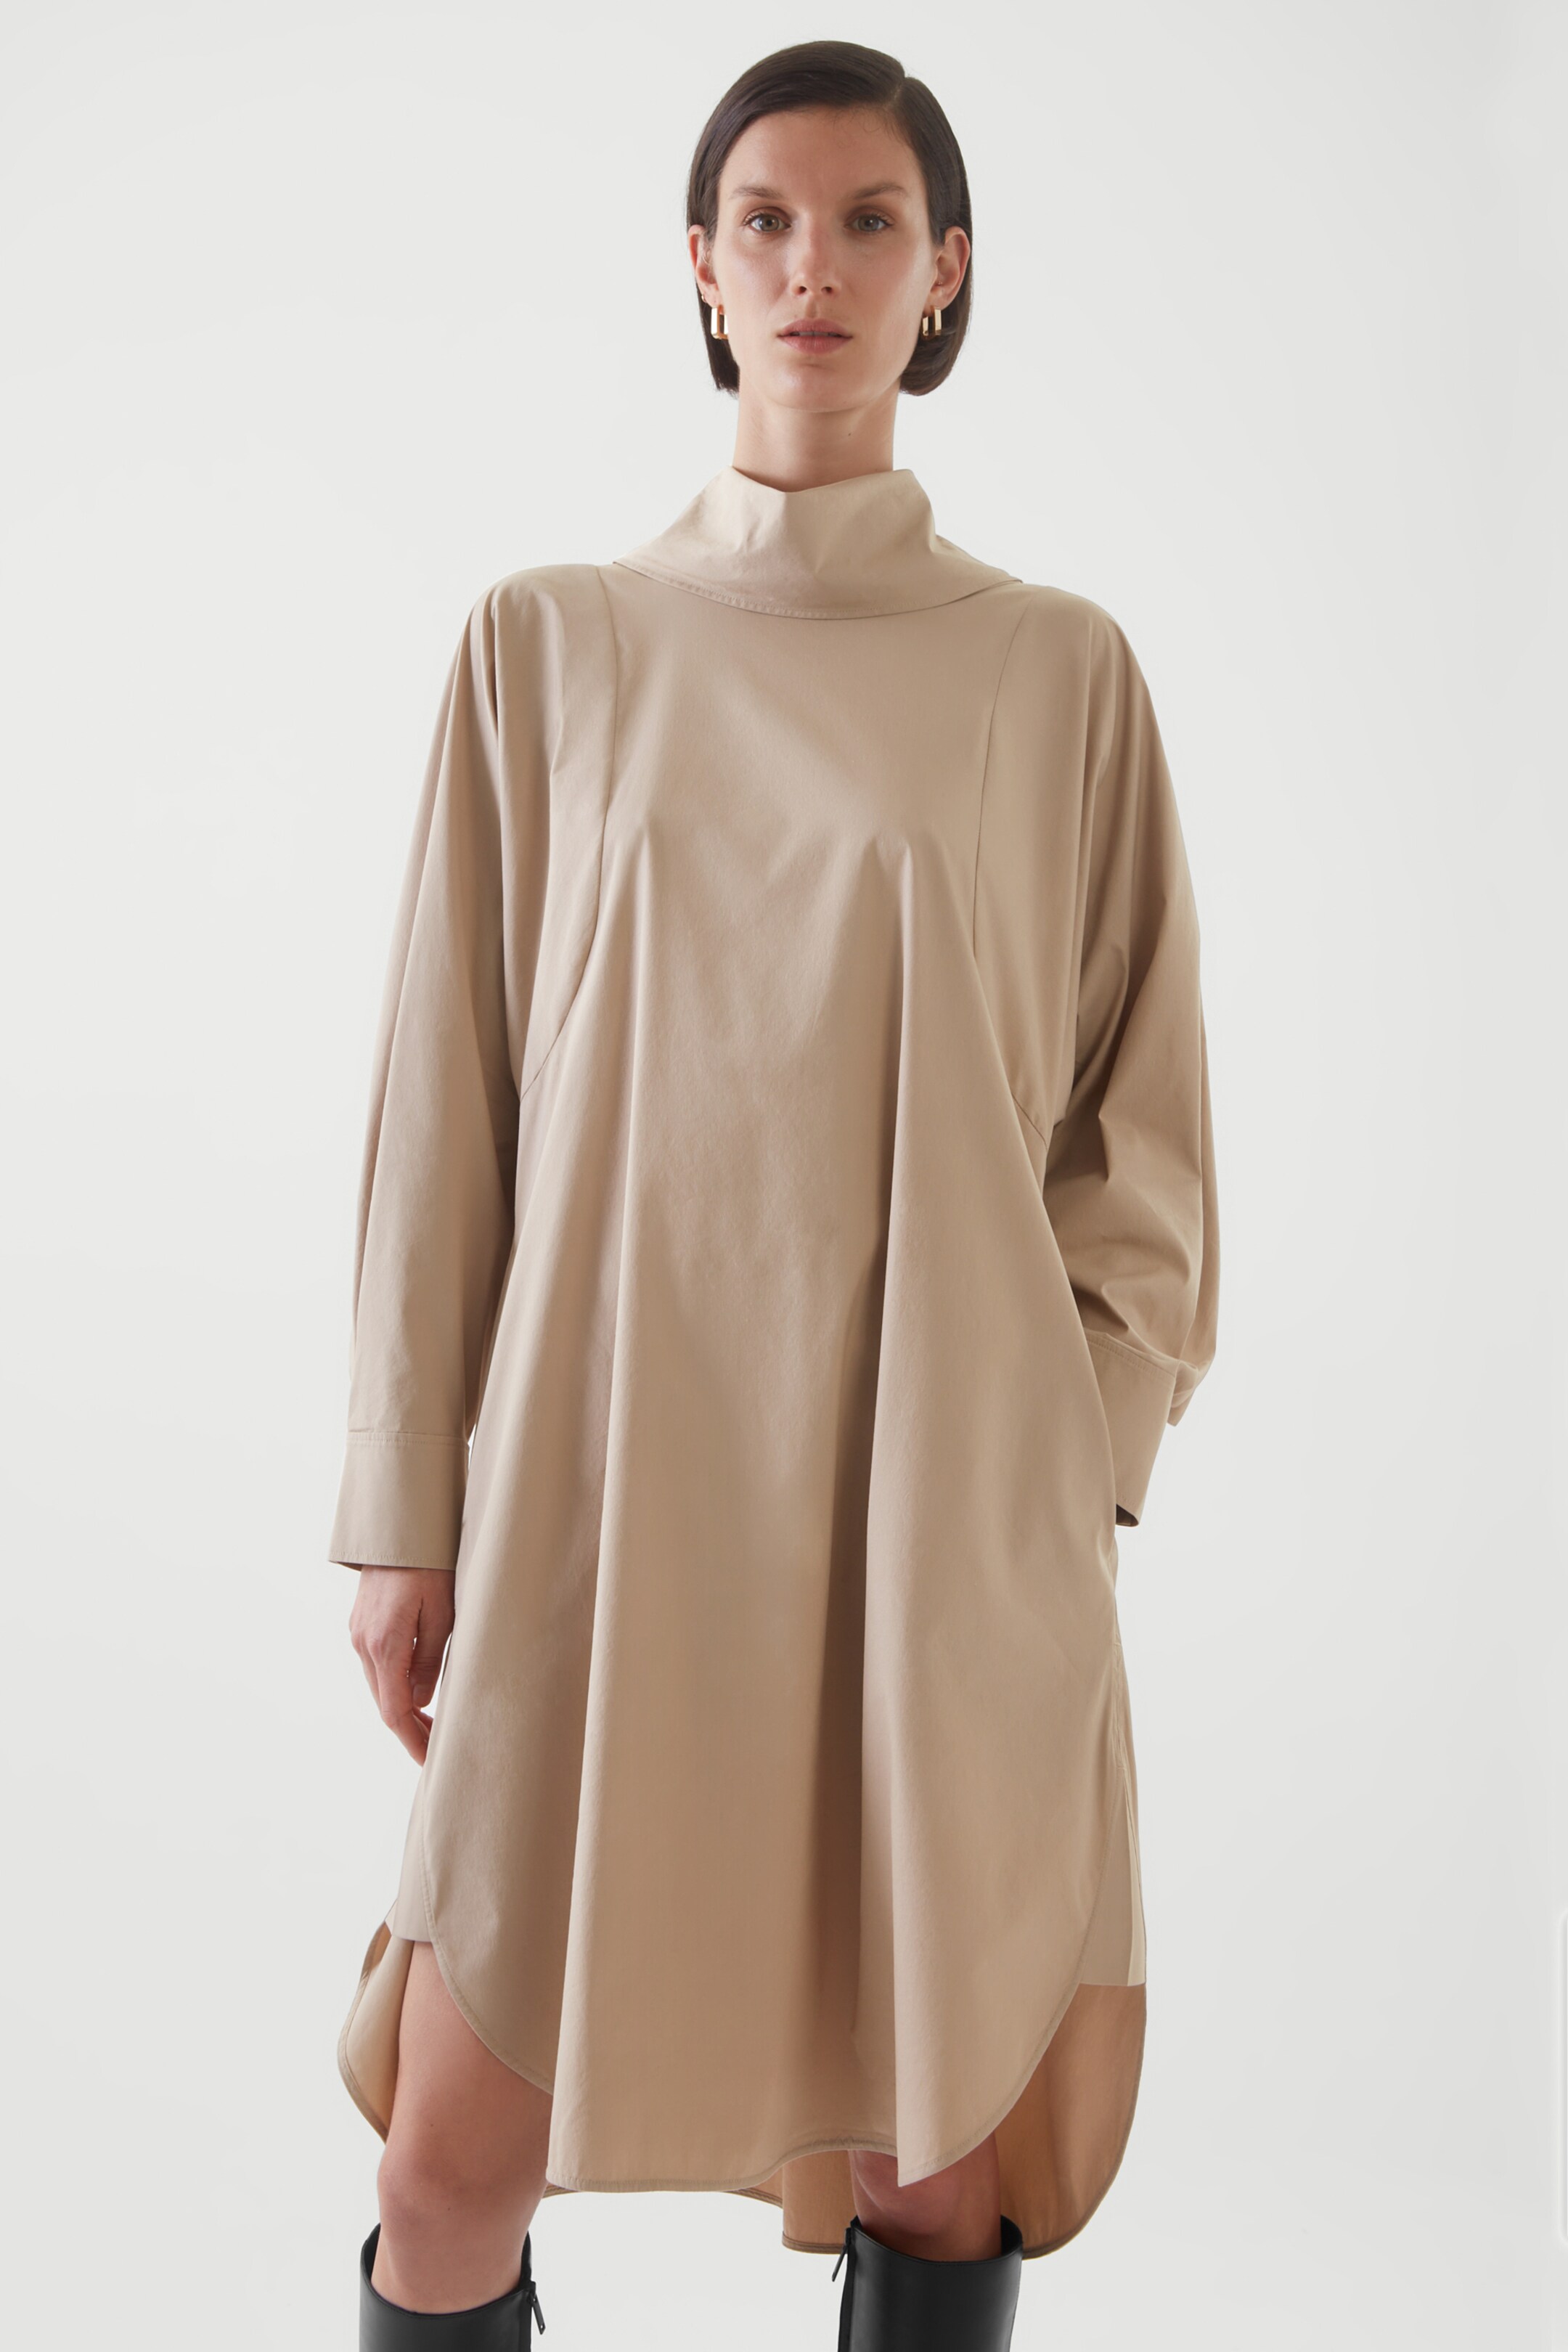 Front image of cos VOLUMINOUS STAND-COLLAR DRESS in BEIGE